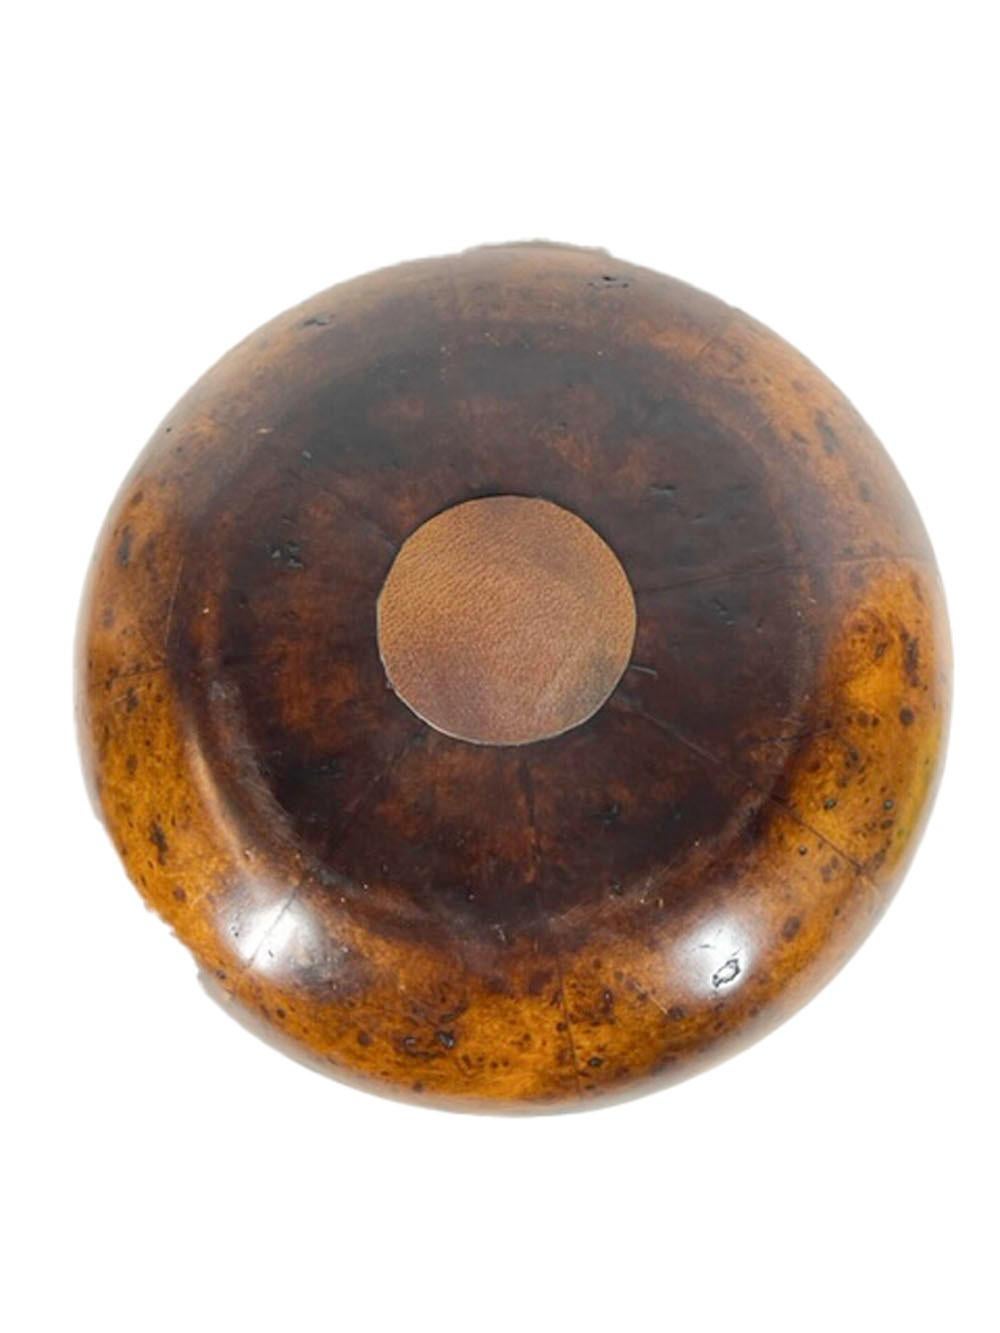 Large Vintage Burled Wood Covered Bowl or Box of Compressed Ball Form In Good Condition For Sale In Nantucket, MA